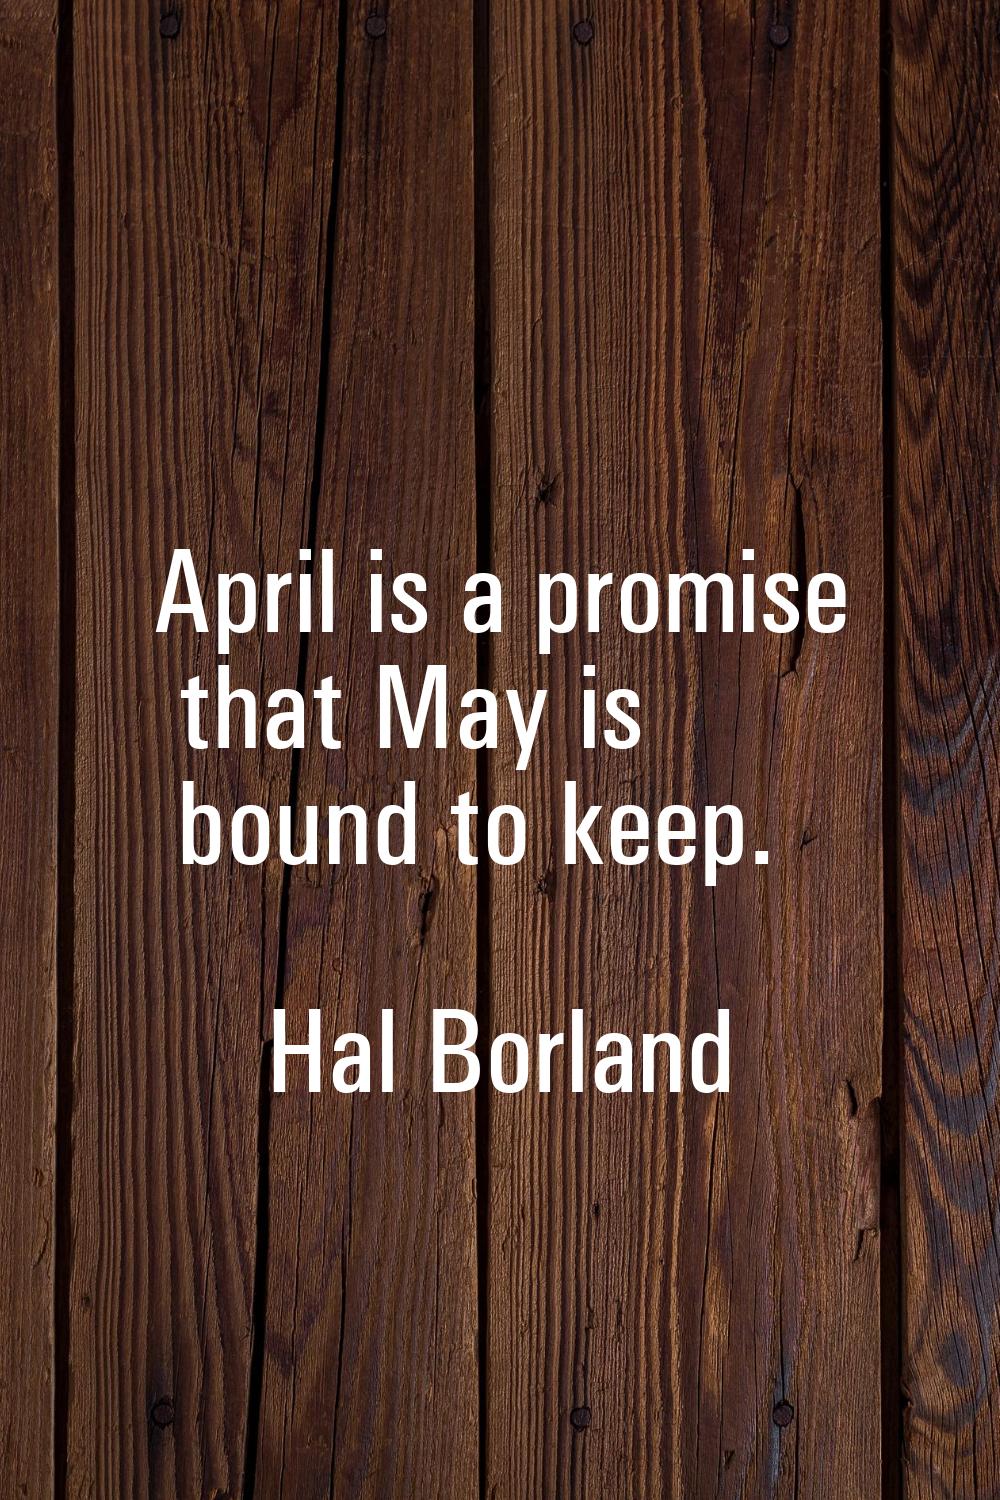 April is a promise that May is bound to keep.